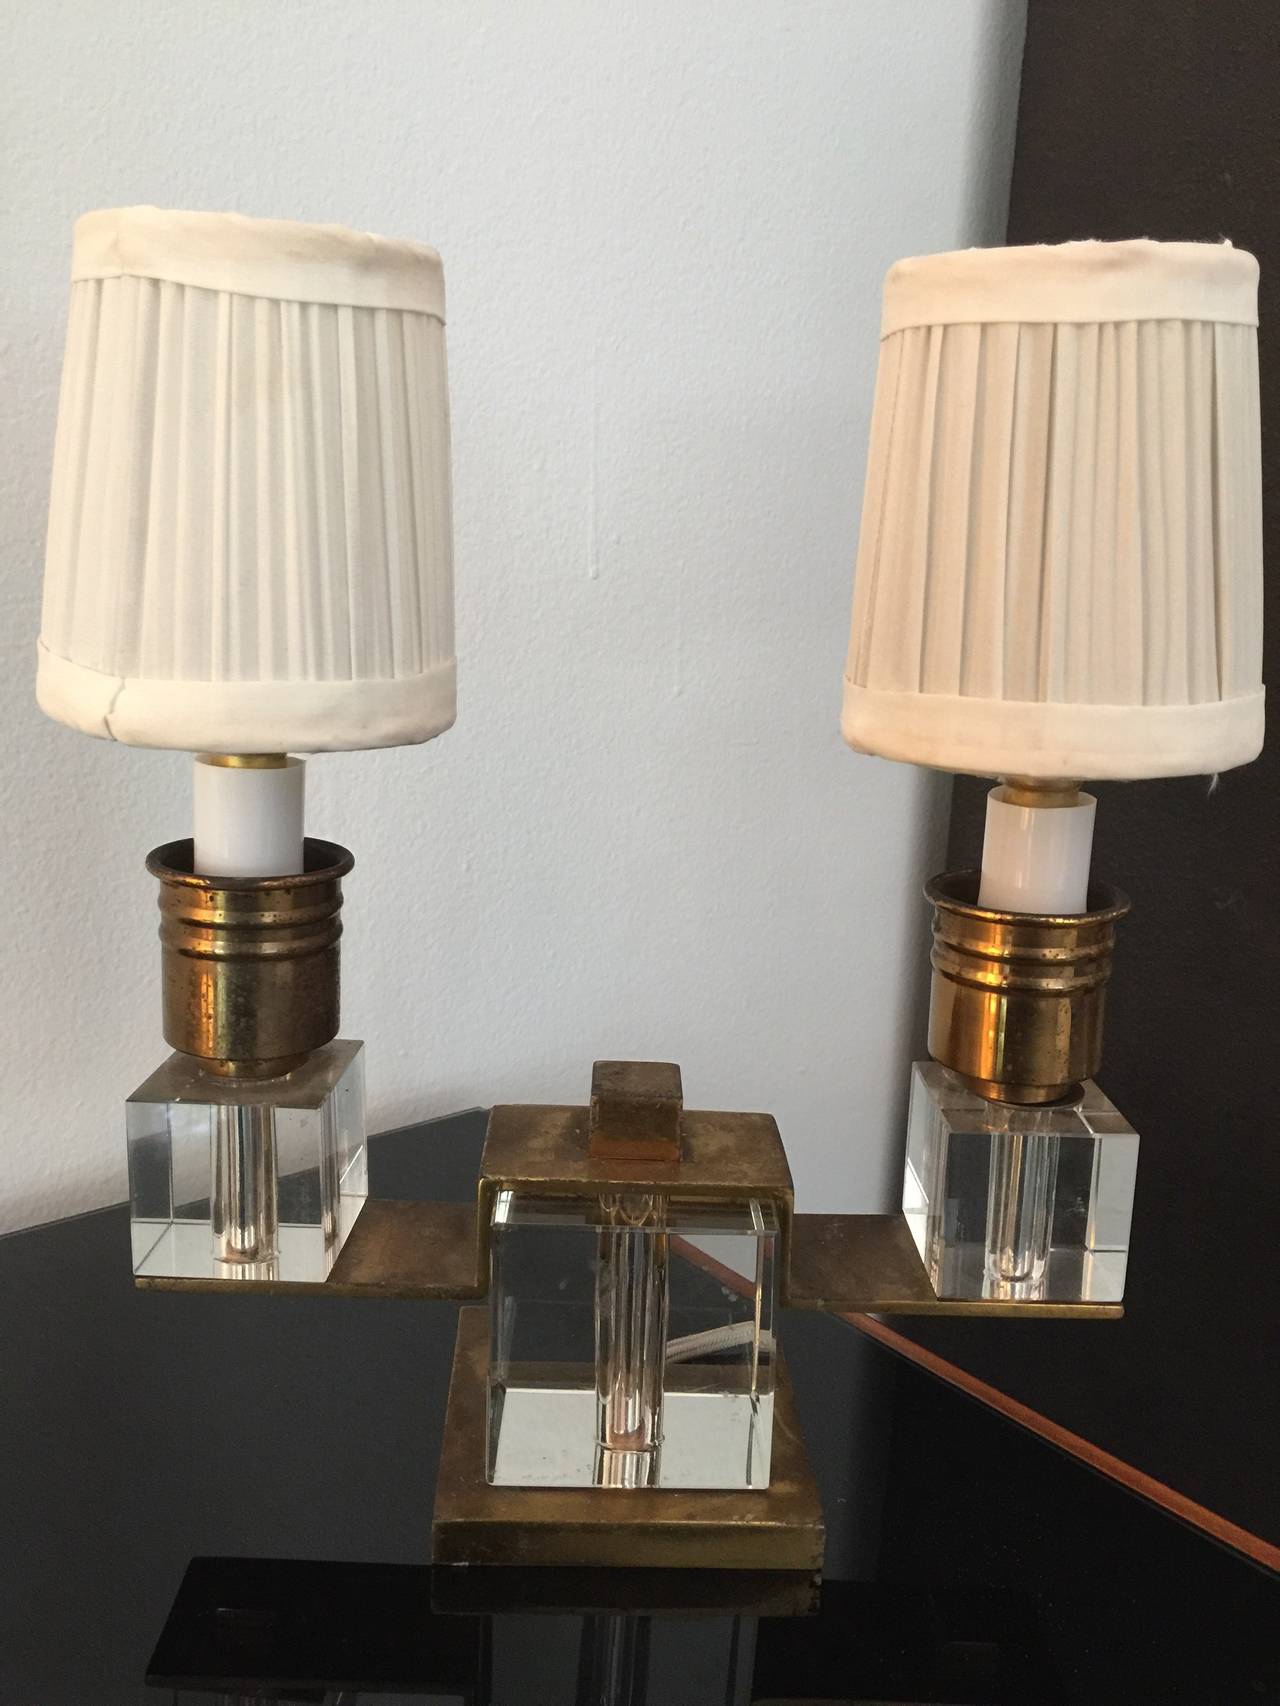 Exquisite petite two-light boudoir lamp in perfect working condition with silk cord. Composed of three crystal blocks encased in patinated dore bronze hardware. All original with dark patination which enhances the beauty of the piece. A jewel.